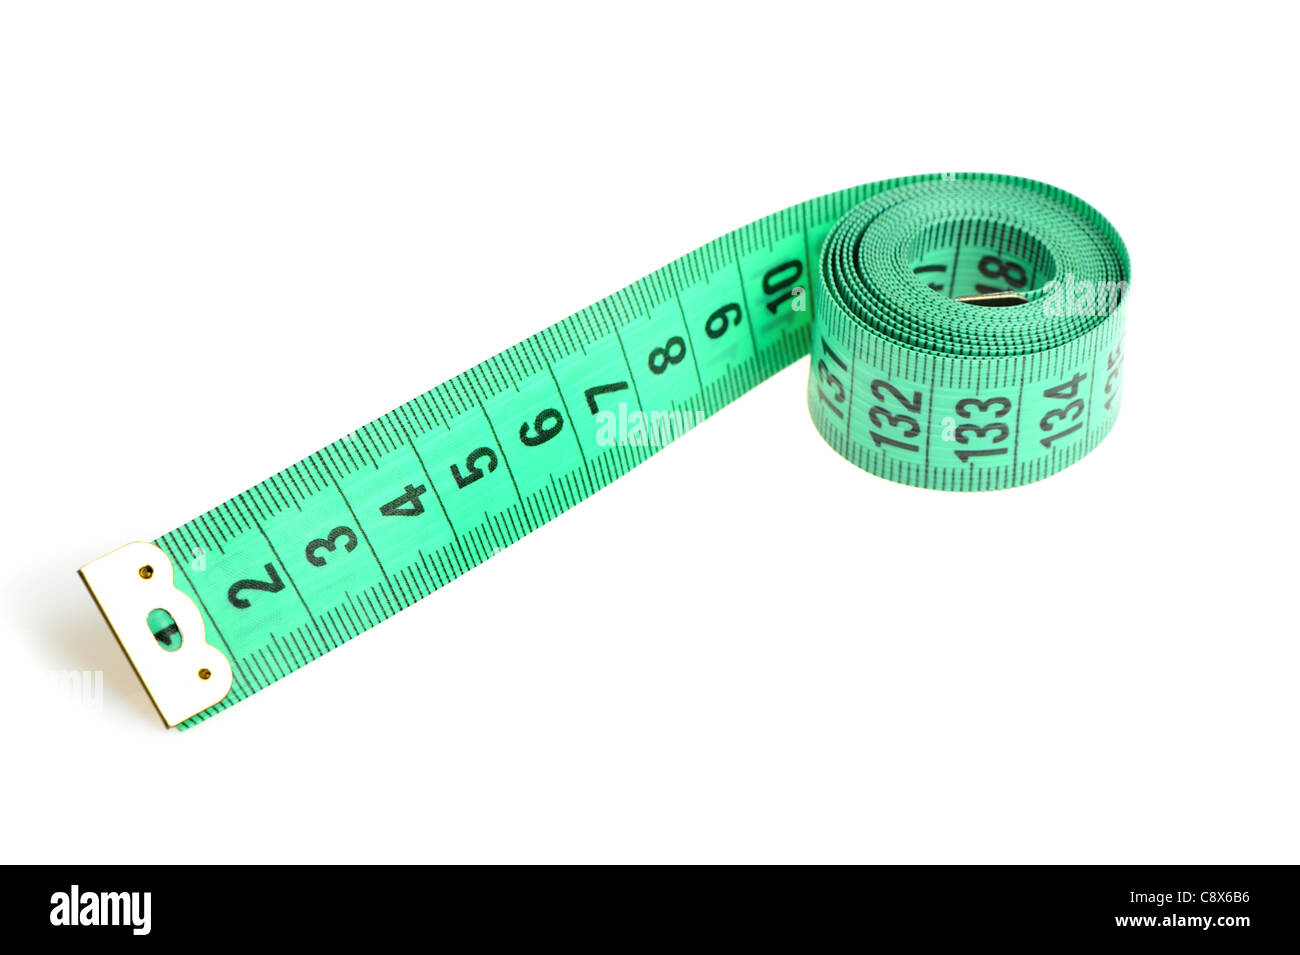 https://c8.alamy.com/comp/C8X6B6/measuring-tape-of-the-tailor-green-color-it-is-isolated-on-a-white-C8X6B6.jpg